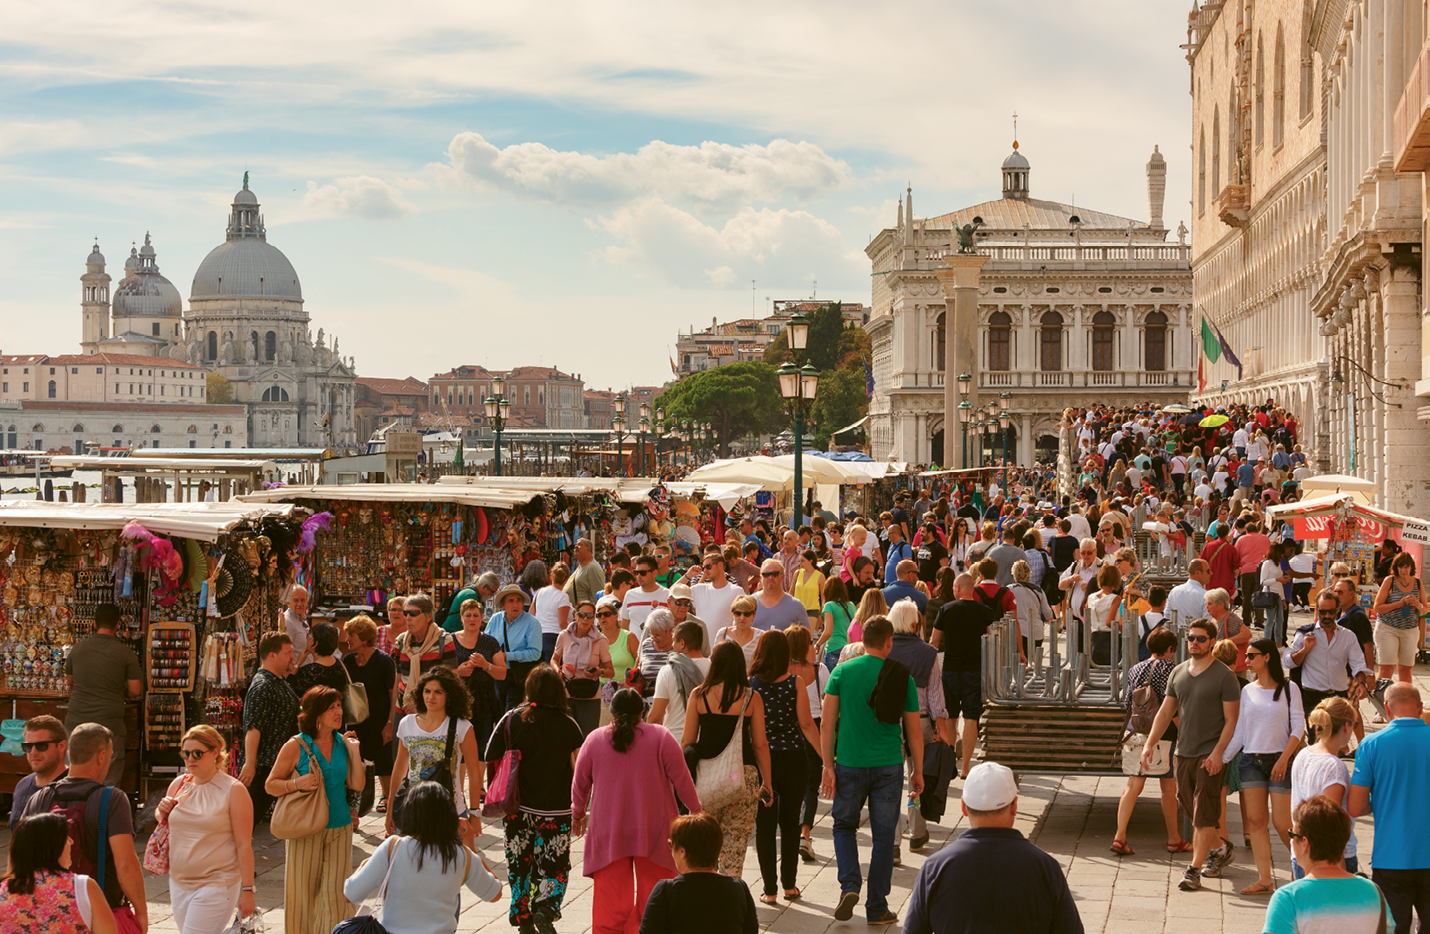 Last fall, The Post and Courier ran an op-ed by art historian and If Venice Dies author Salvatore Settis, who warns of unchecked tourism killing an historic city, such as Venice (shown here).